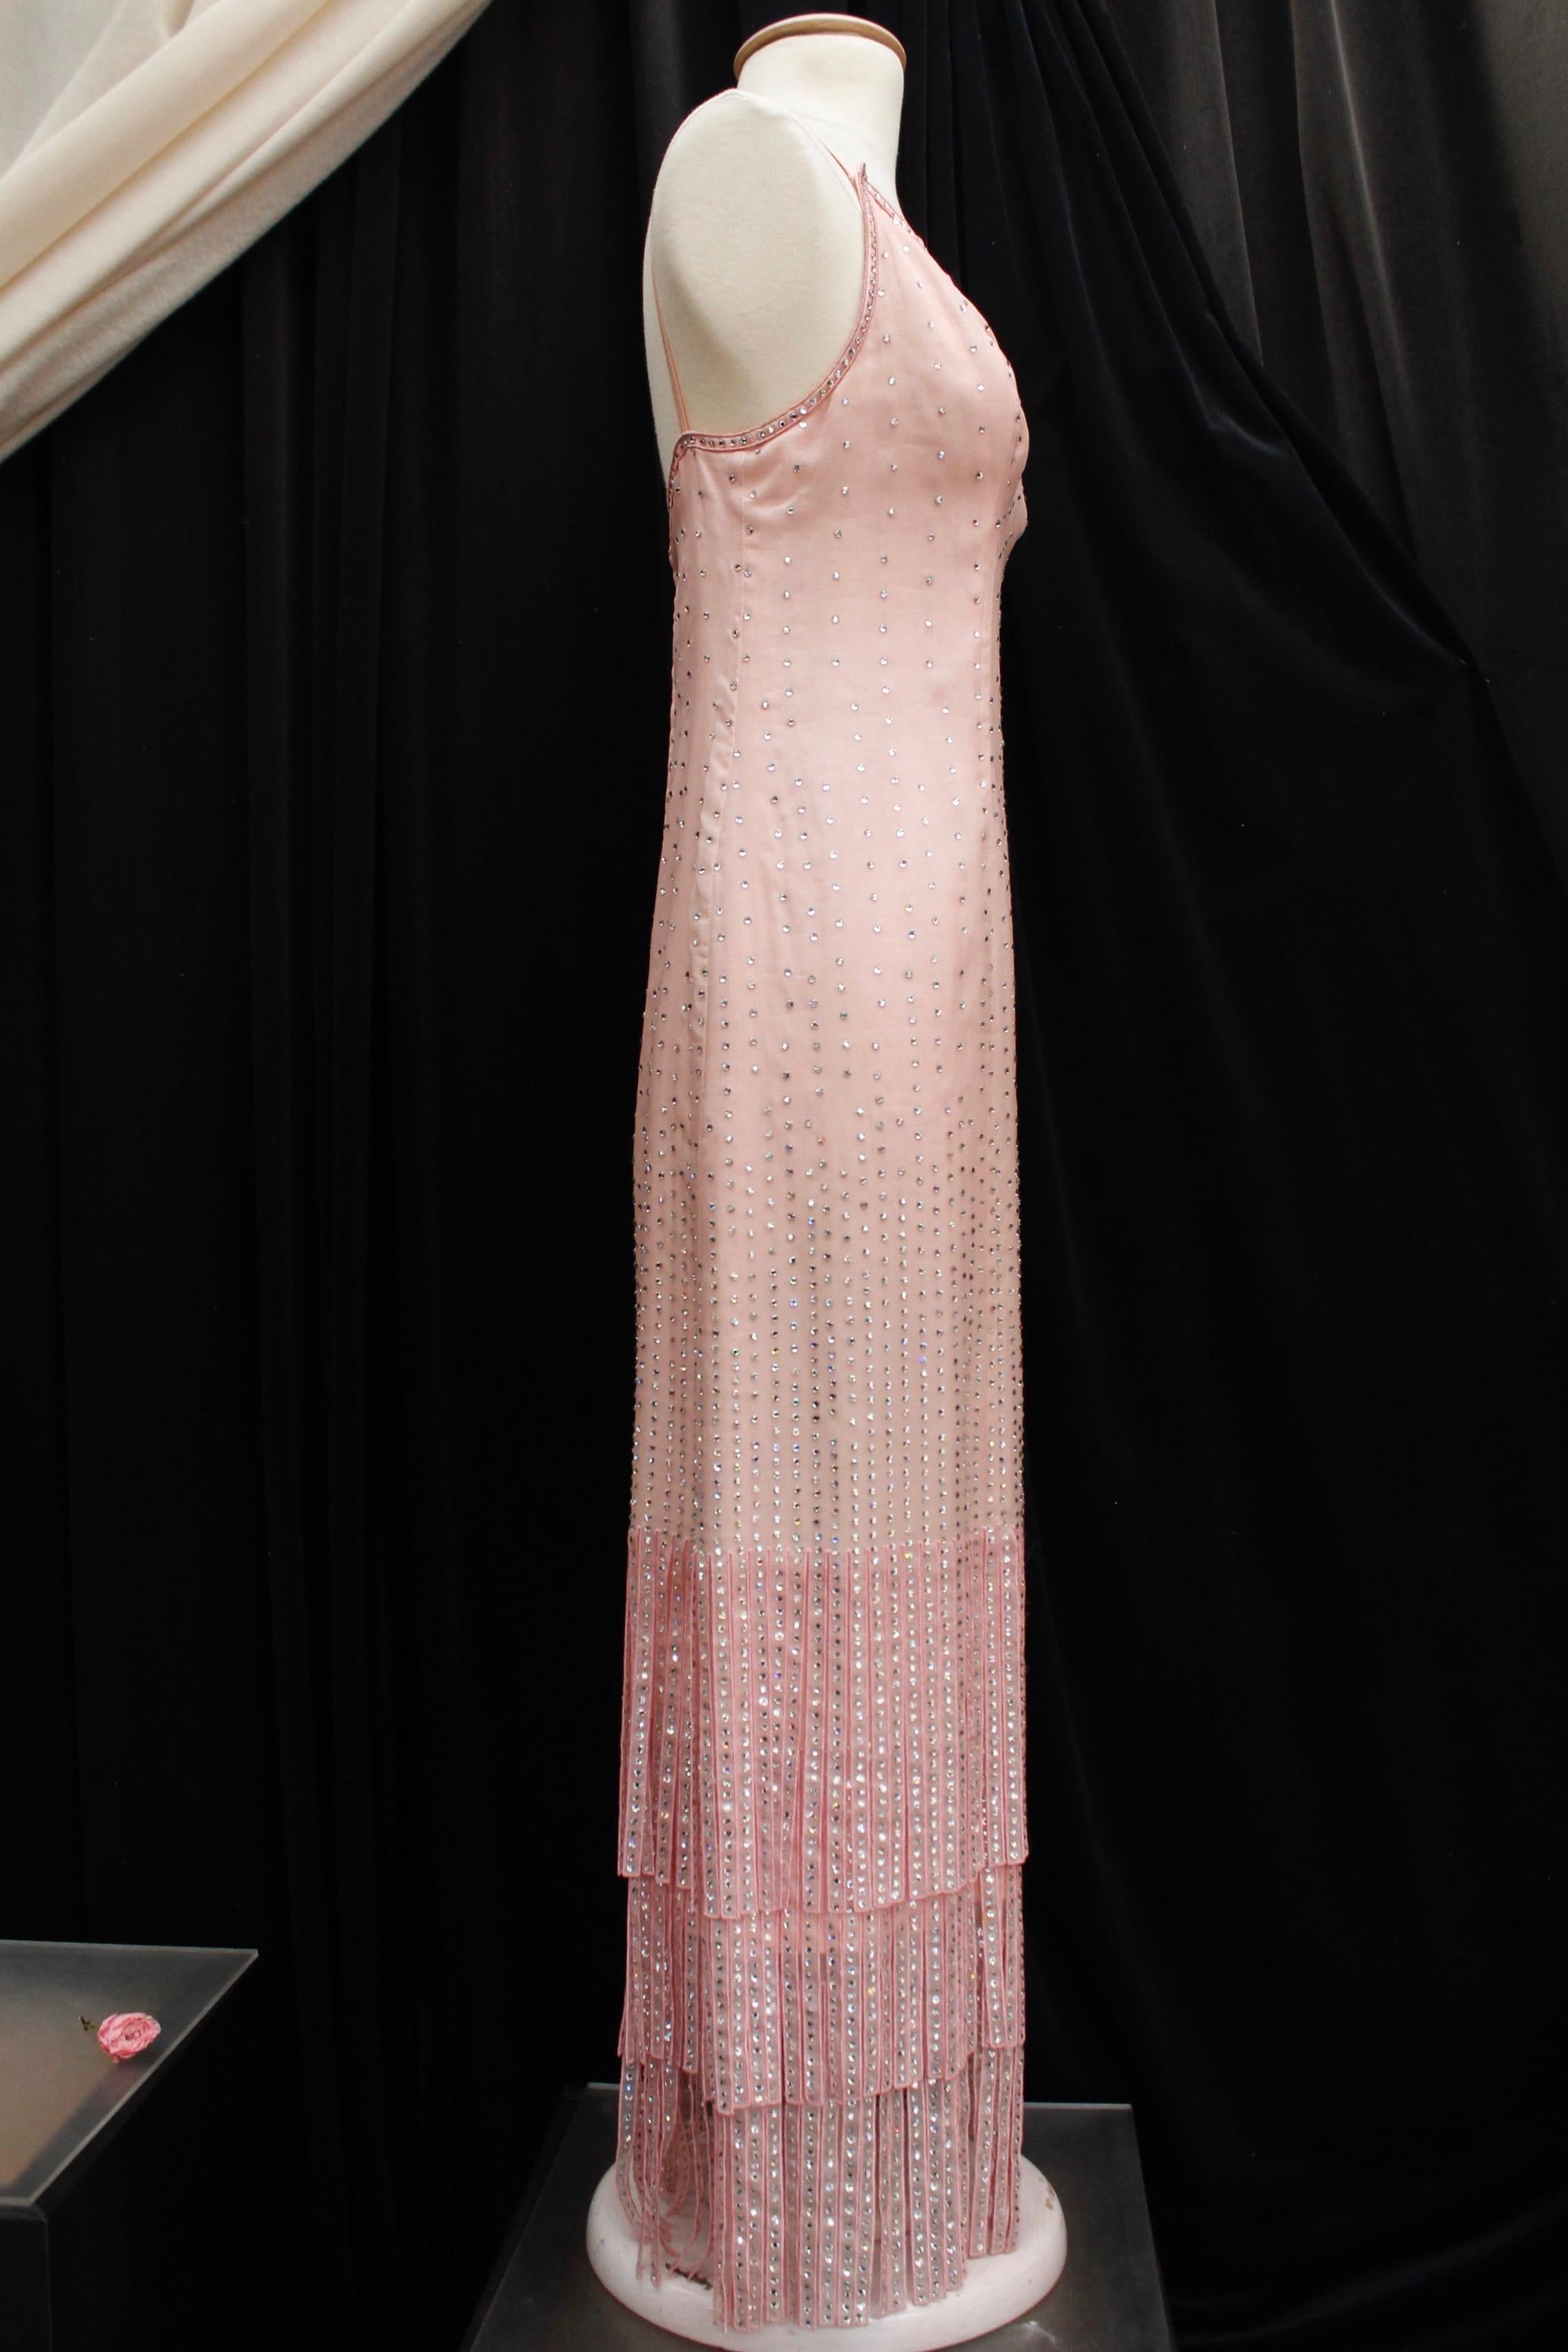 PIERRE BALMAIN Paris (Made in France) – Nice long evening dress composed of light pink organza embroidered with rhinestones. It features a straight cut, a V-neck and thin shoulder straps? The bottom of the dress is composed of three strands of